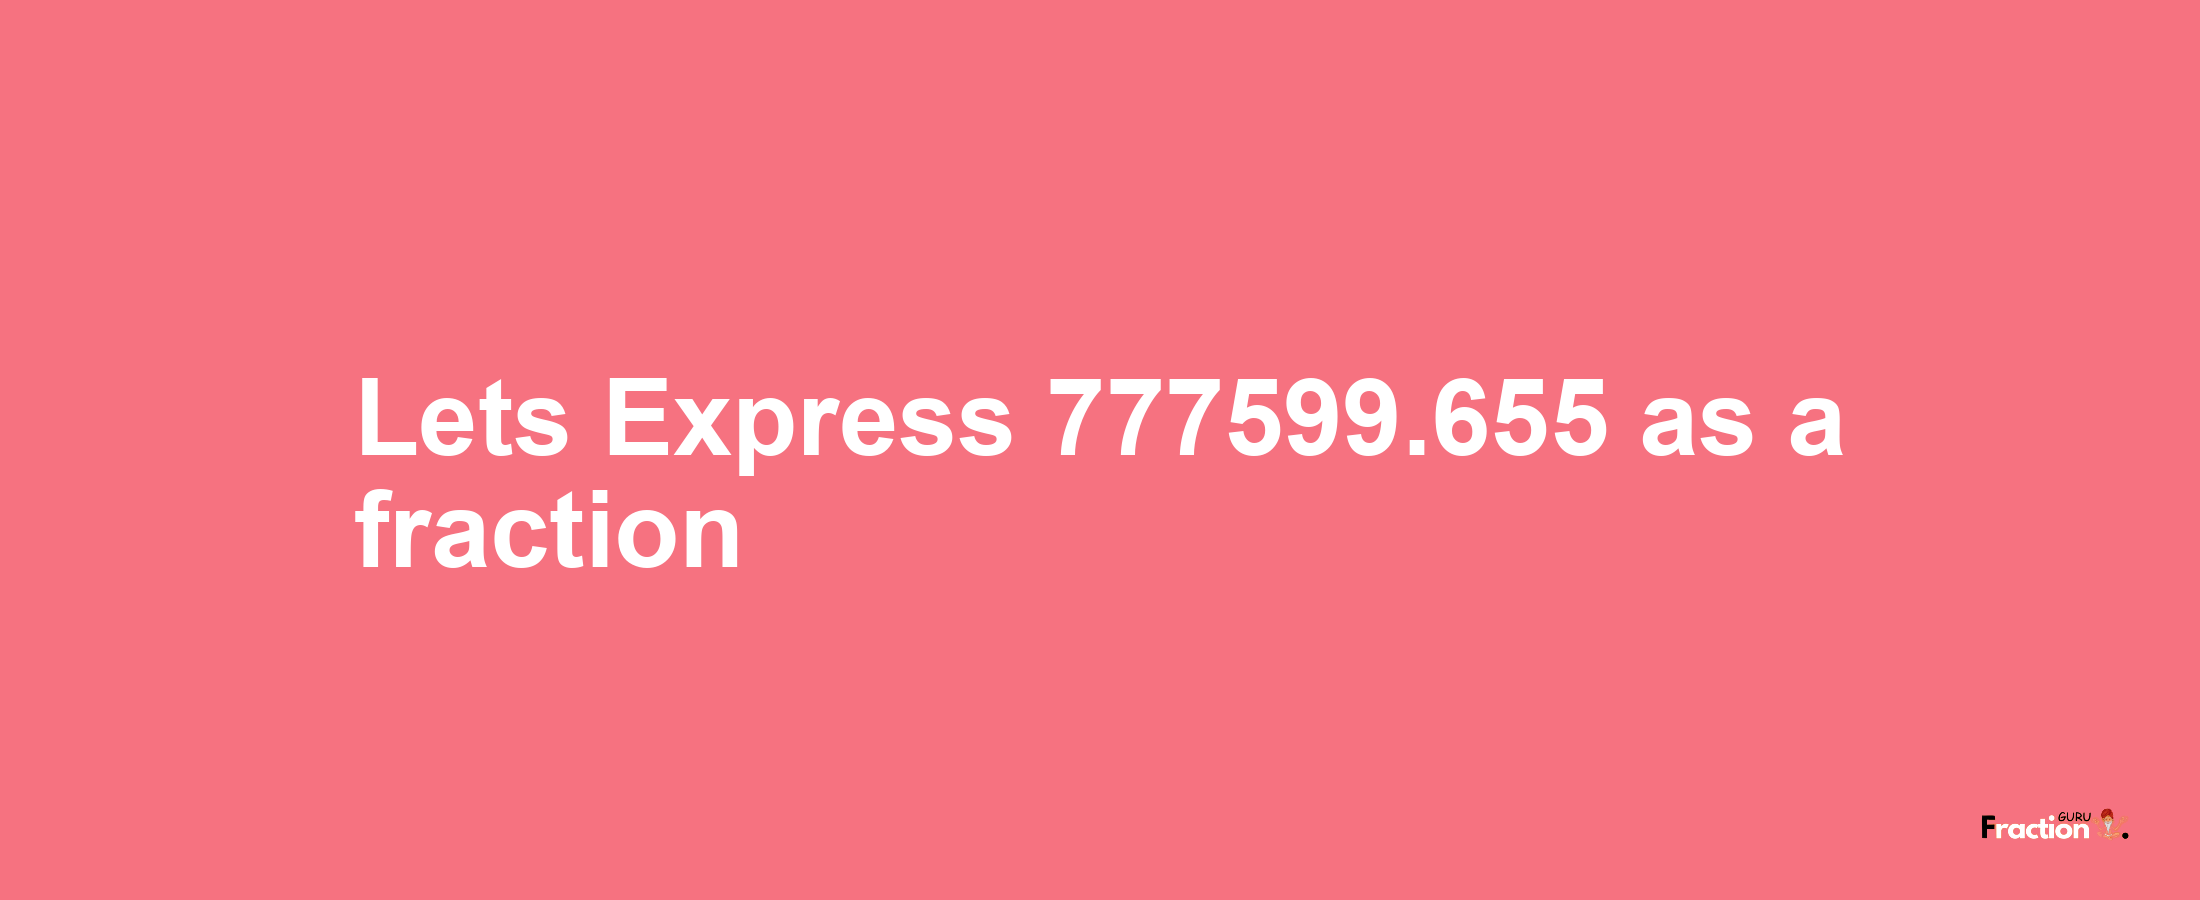 Lets Express 777599.655 as afraction